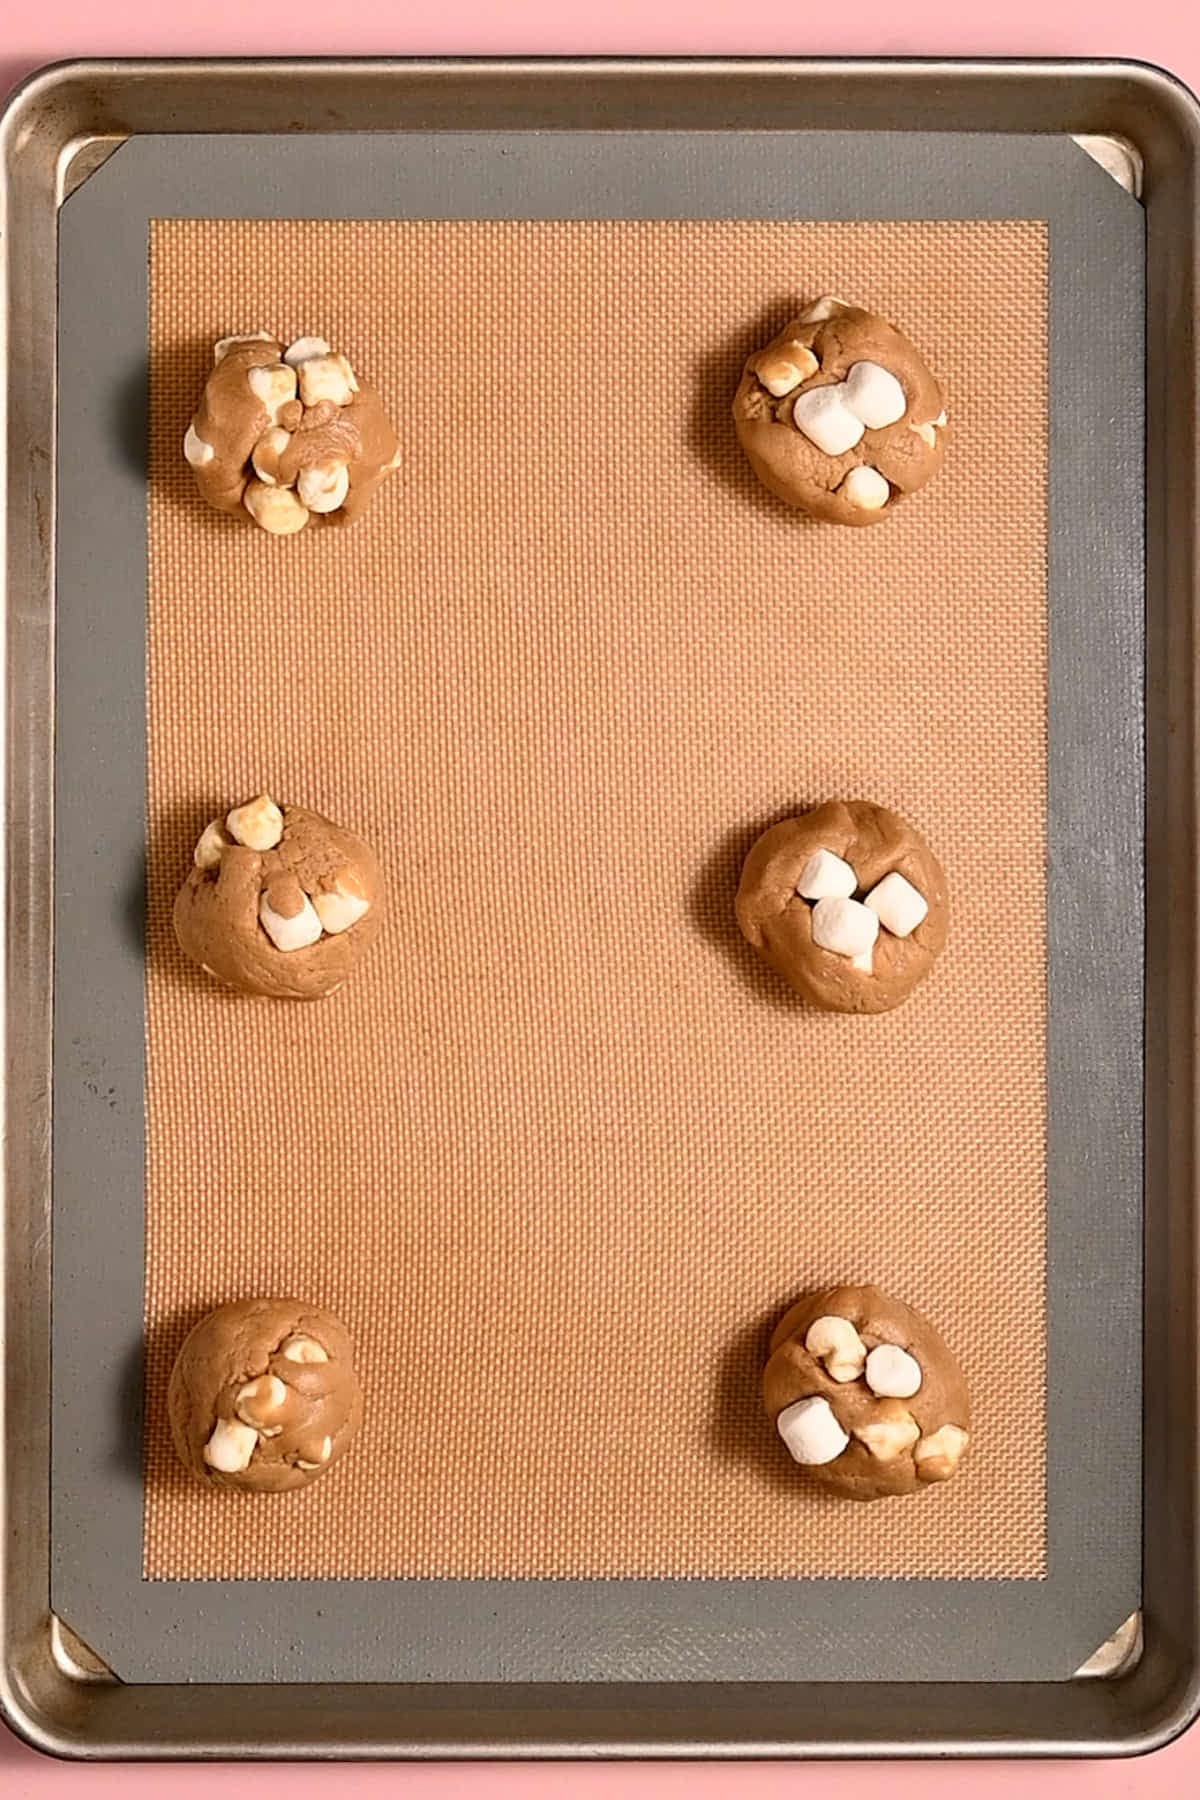 Marshmallow cookies lined up on a baking tray ready for the oven